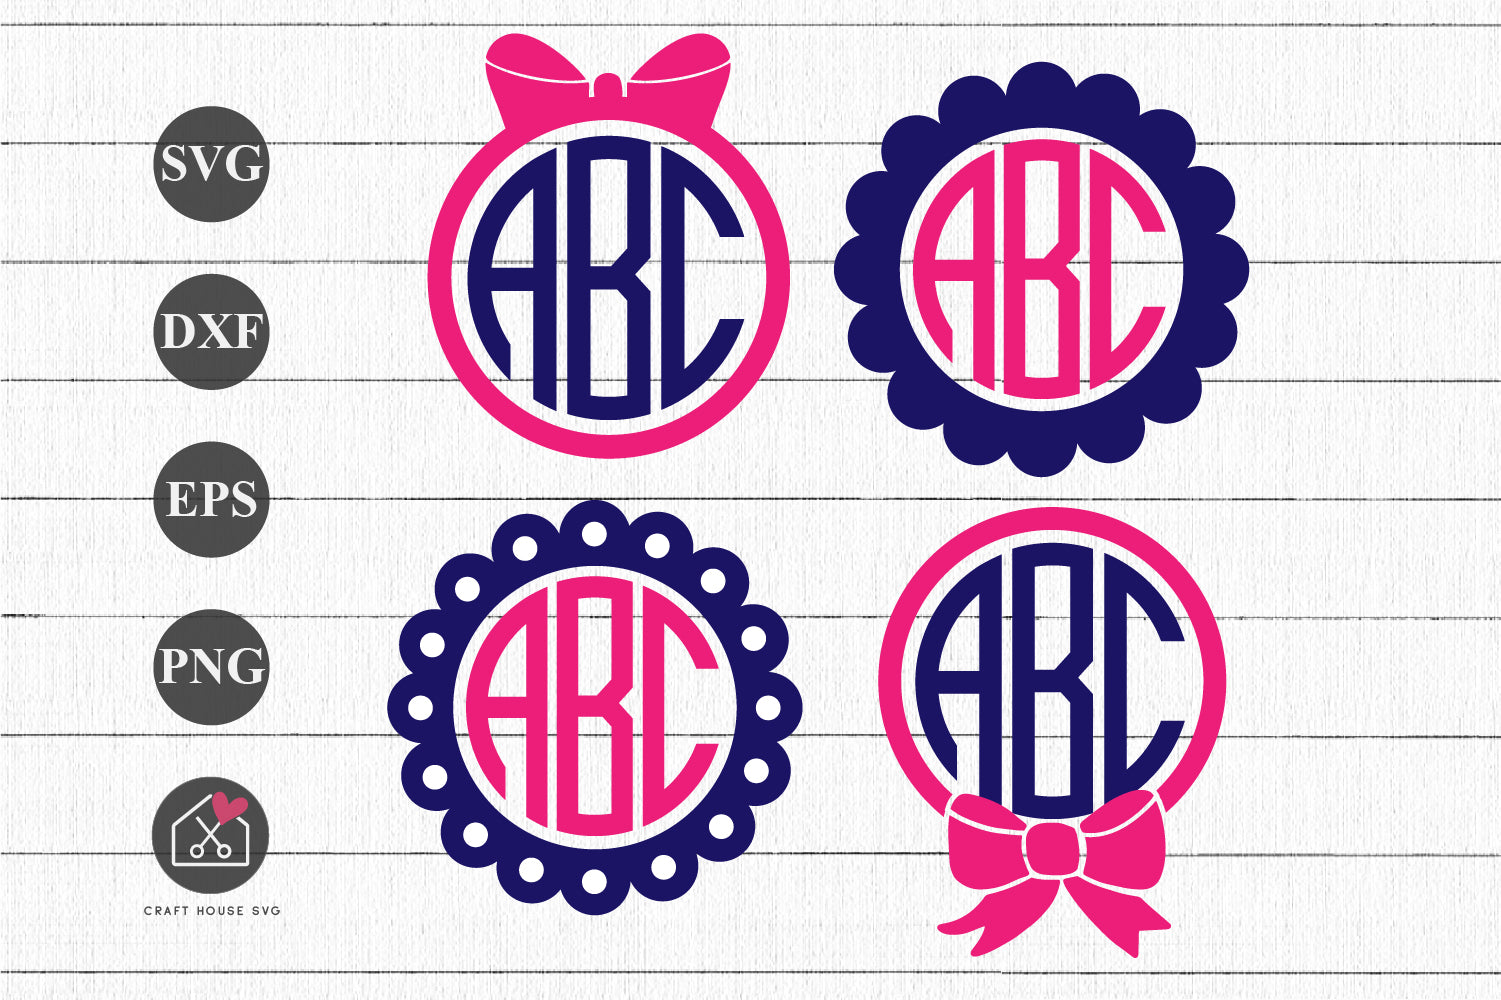 Circle Monogram Frame #3 with Bow SVG - Free SVG files